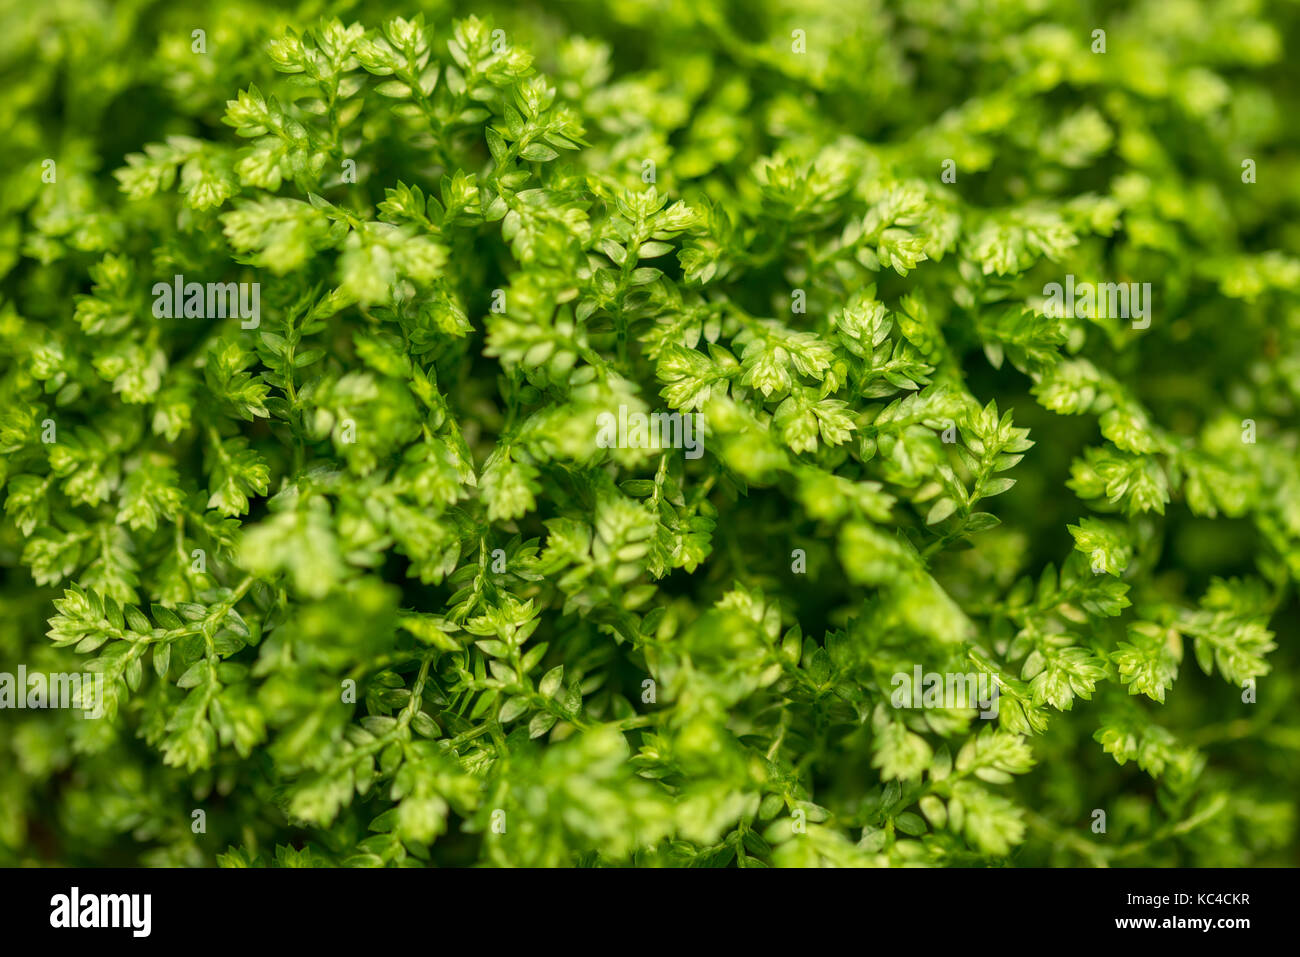 Green fresh leaves in nature.Environment concept. Stock Photo